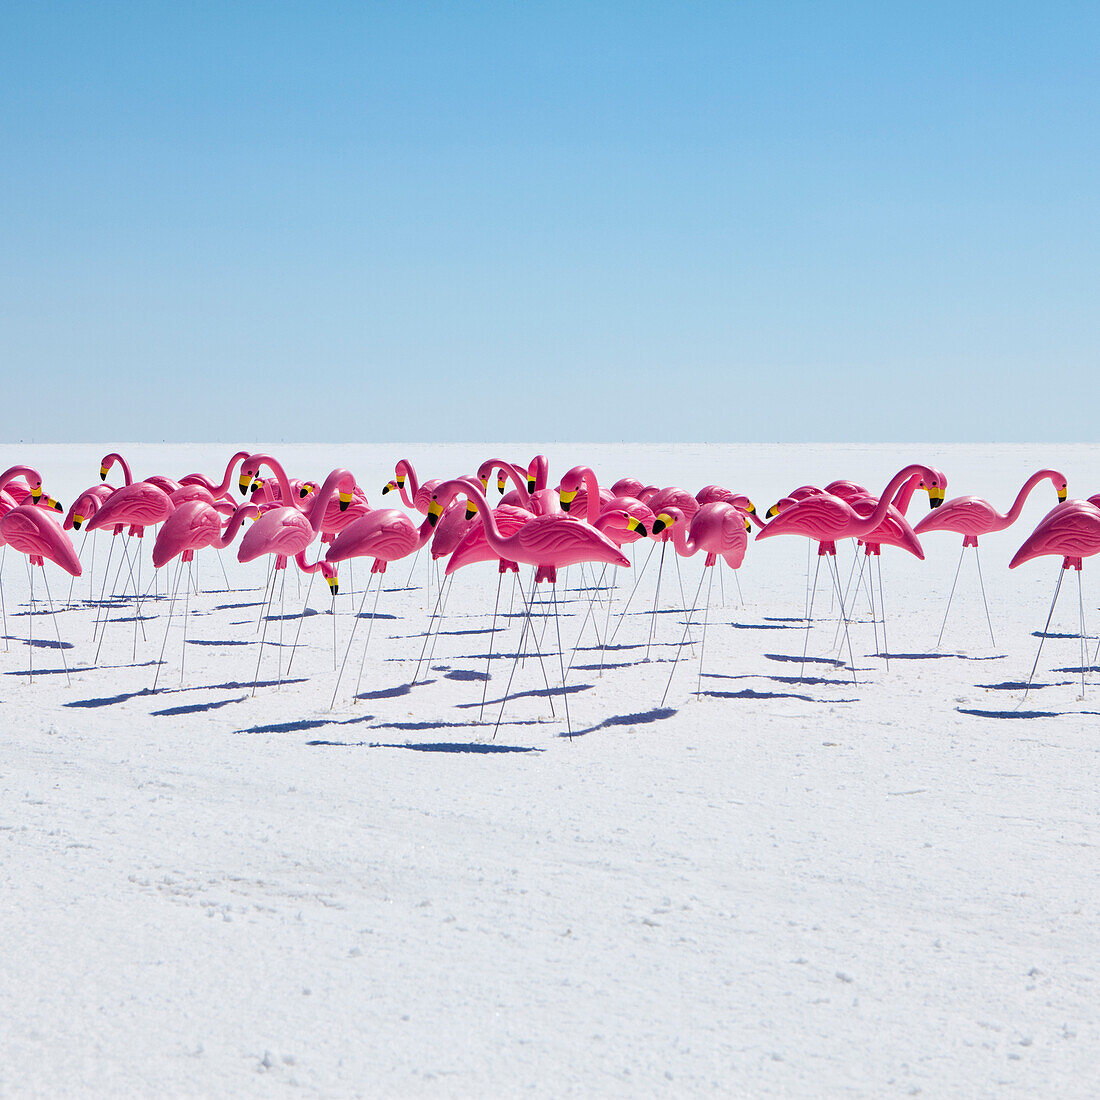 A large group of plastic pink flamingos on Bonneville Salt Flats. Speed Week, an annual amateur auto racing event on the salt flats in Utah, USA., Bonneville Salt Flats, USA